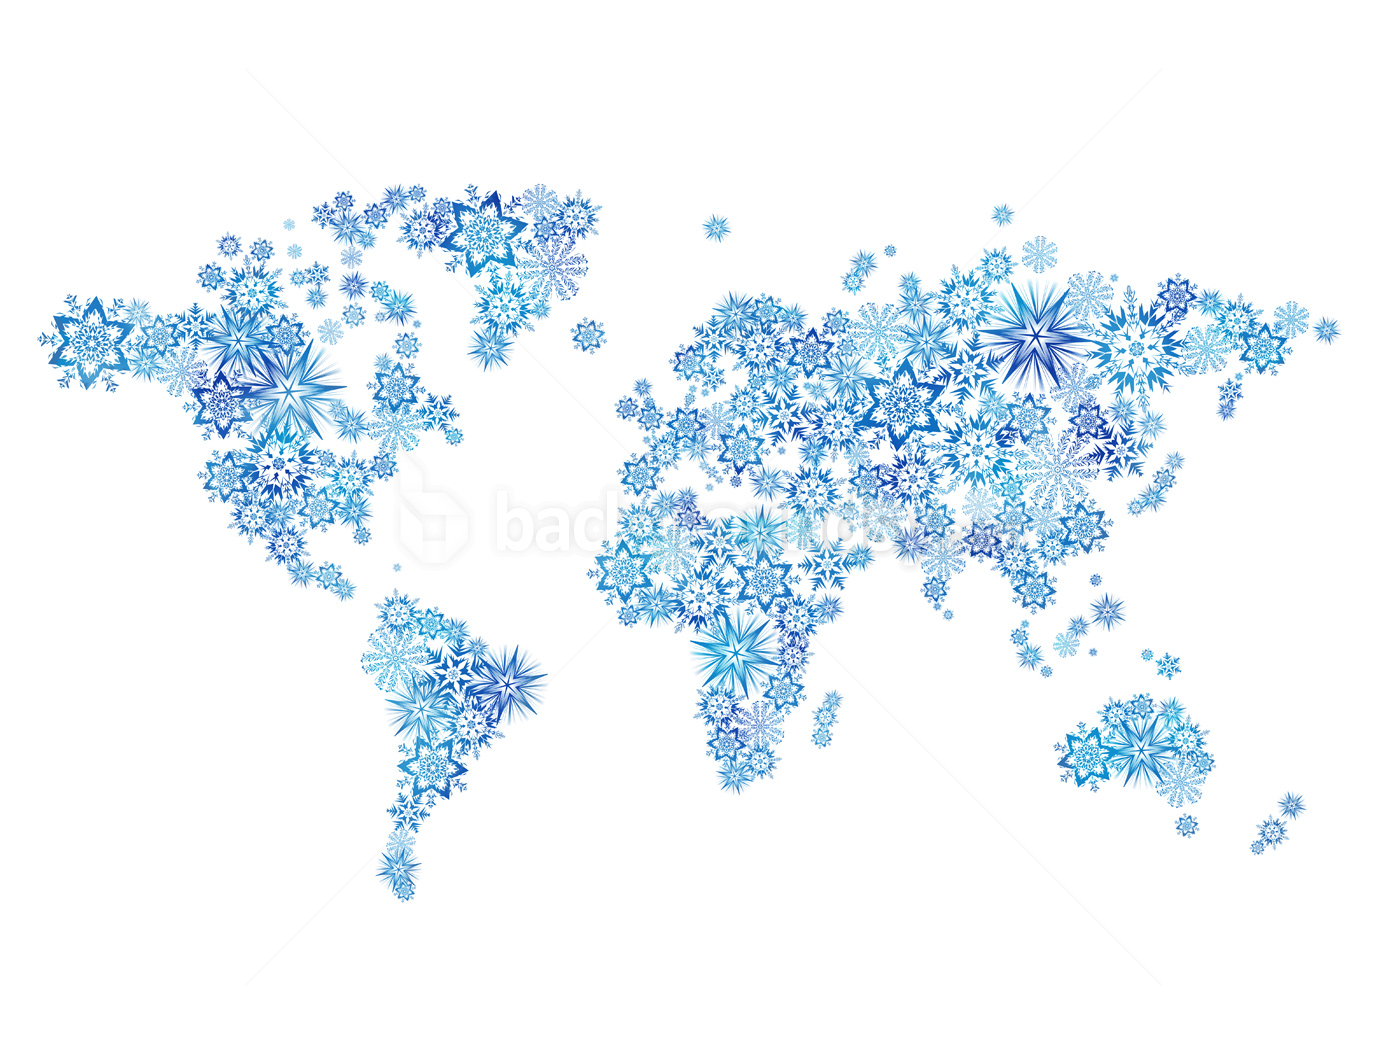 World Map with Transparent Background